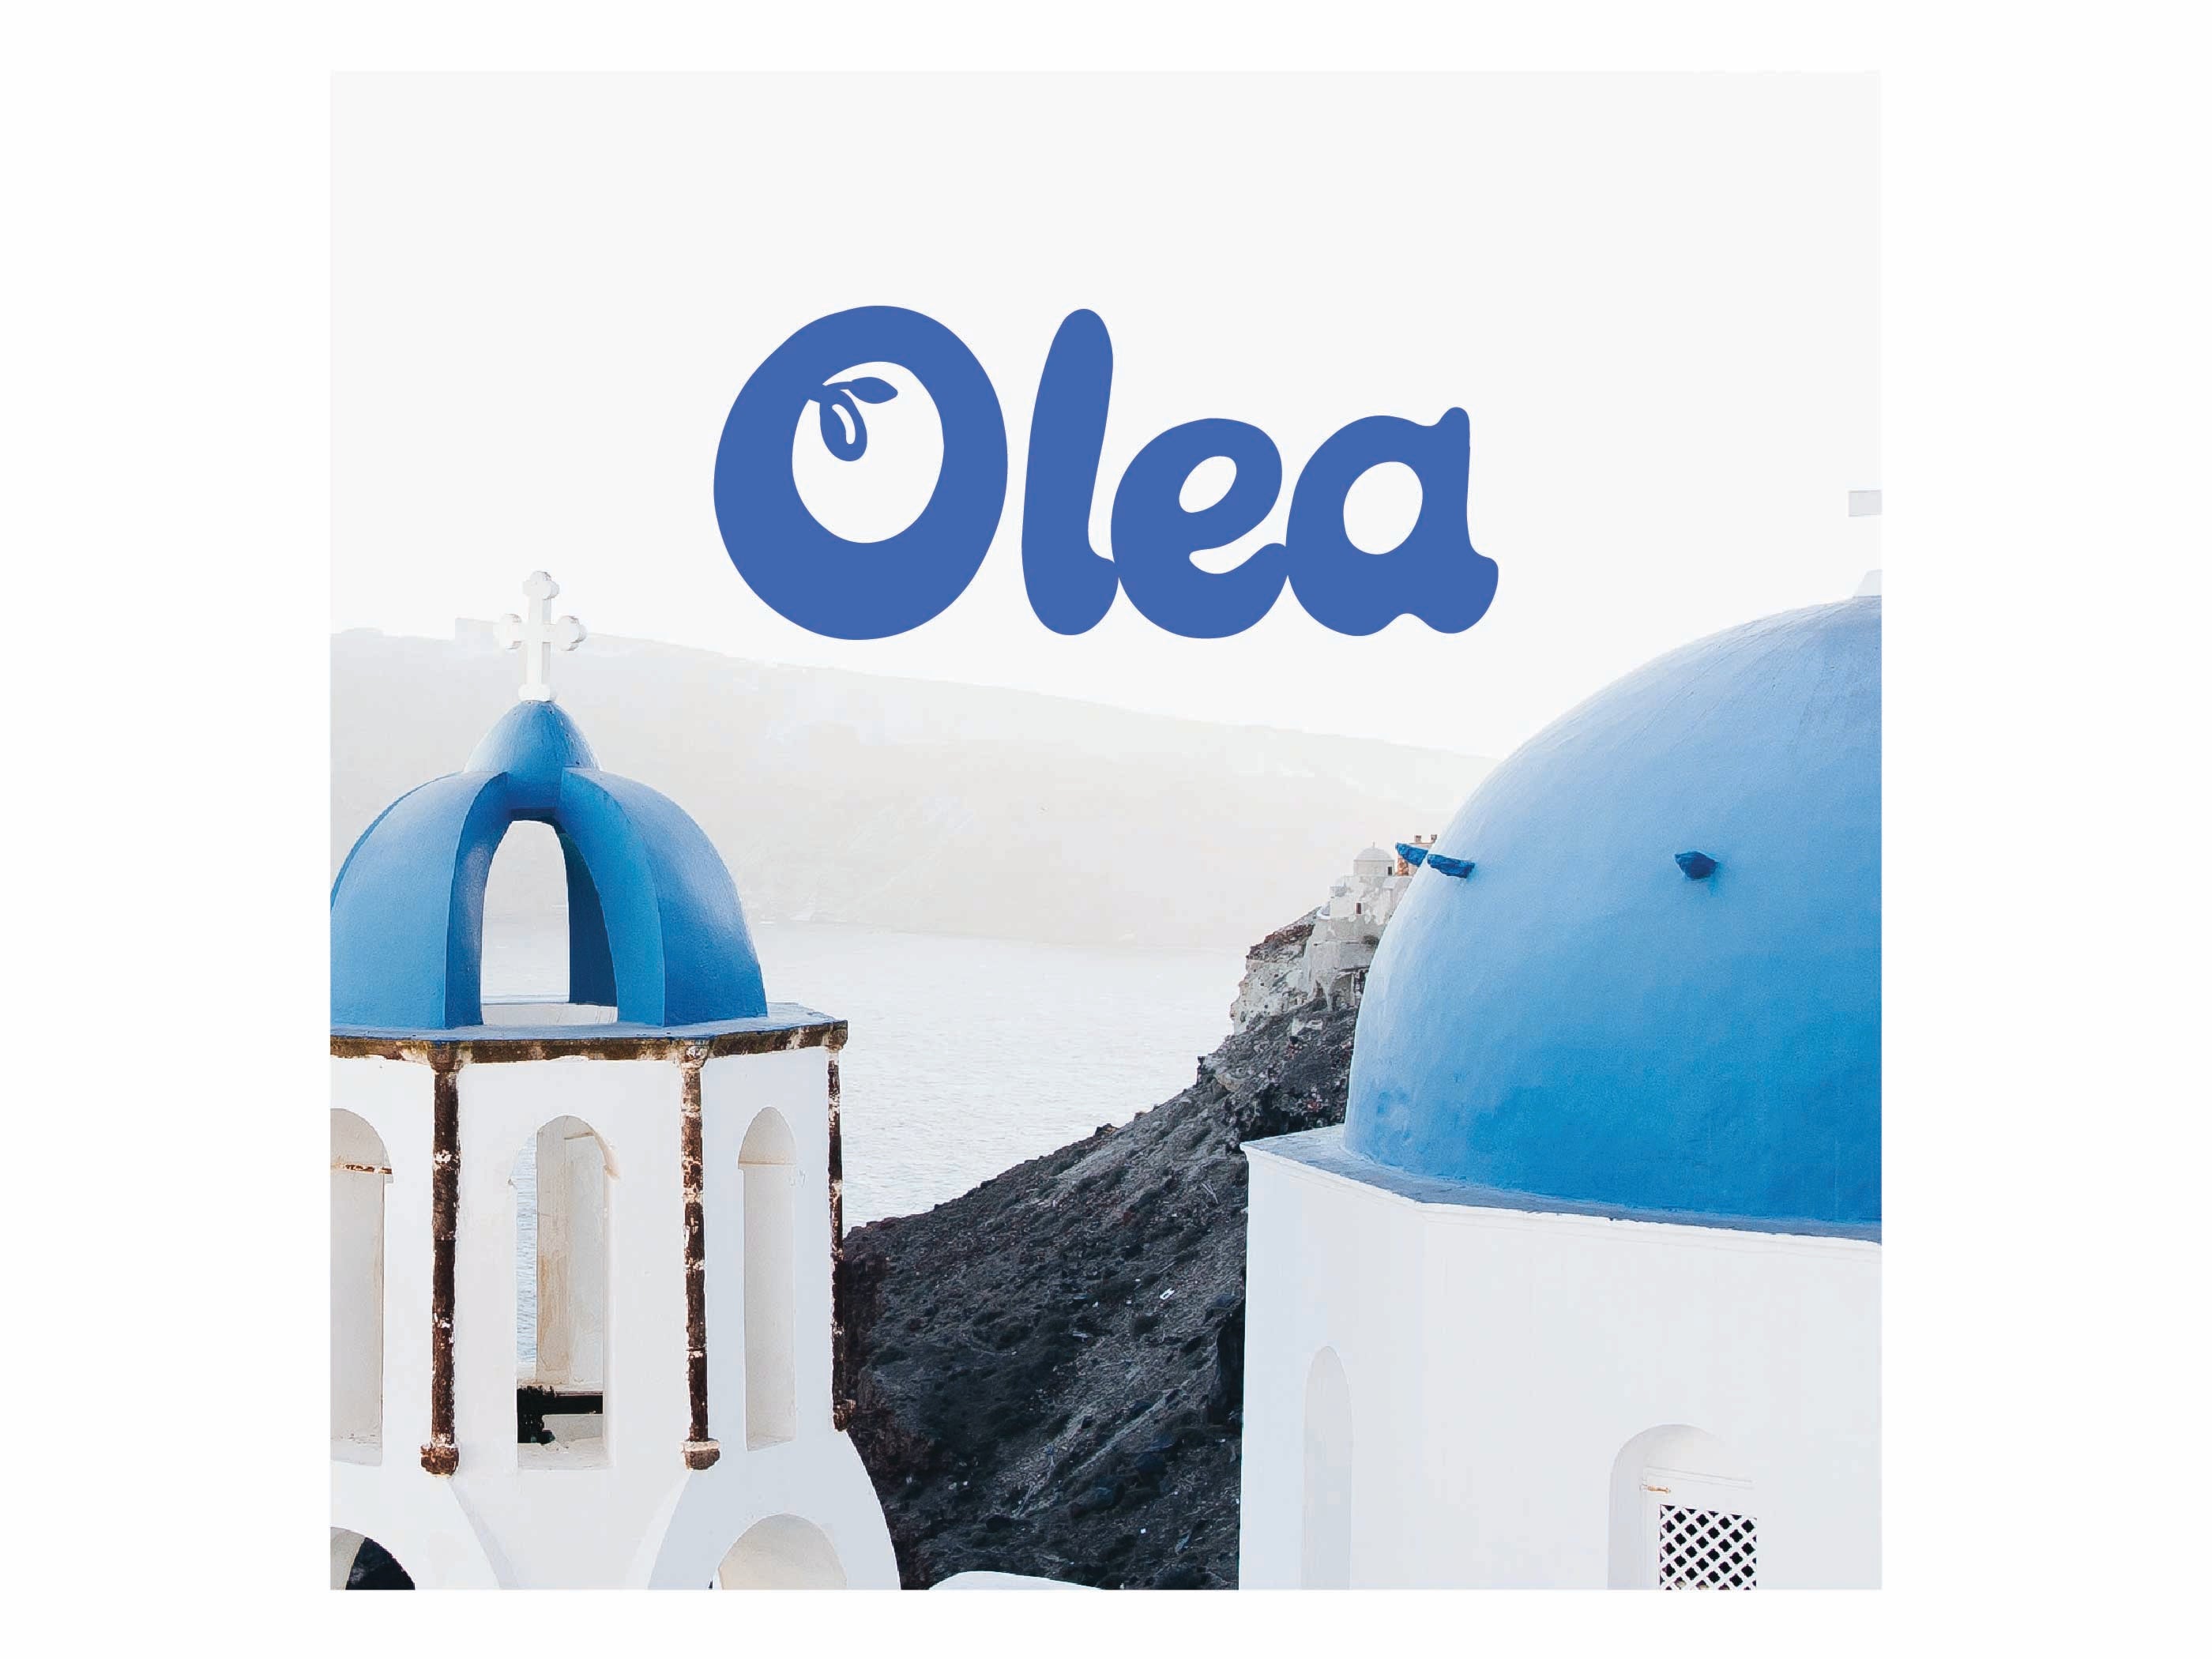 Greek blue-roofed buildings with the Olea logo